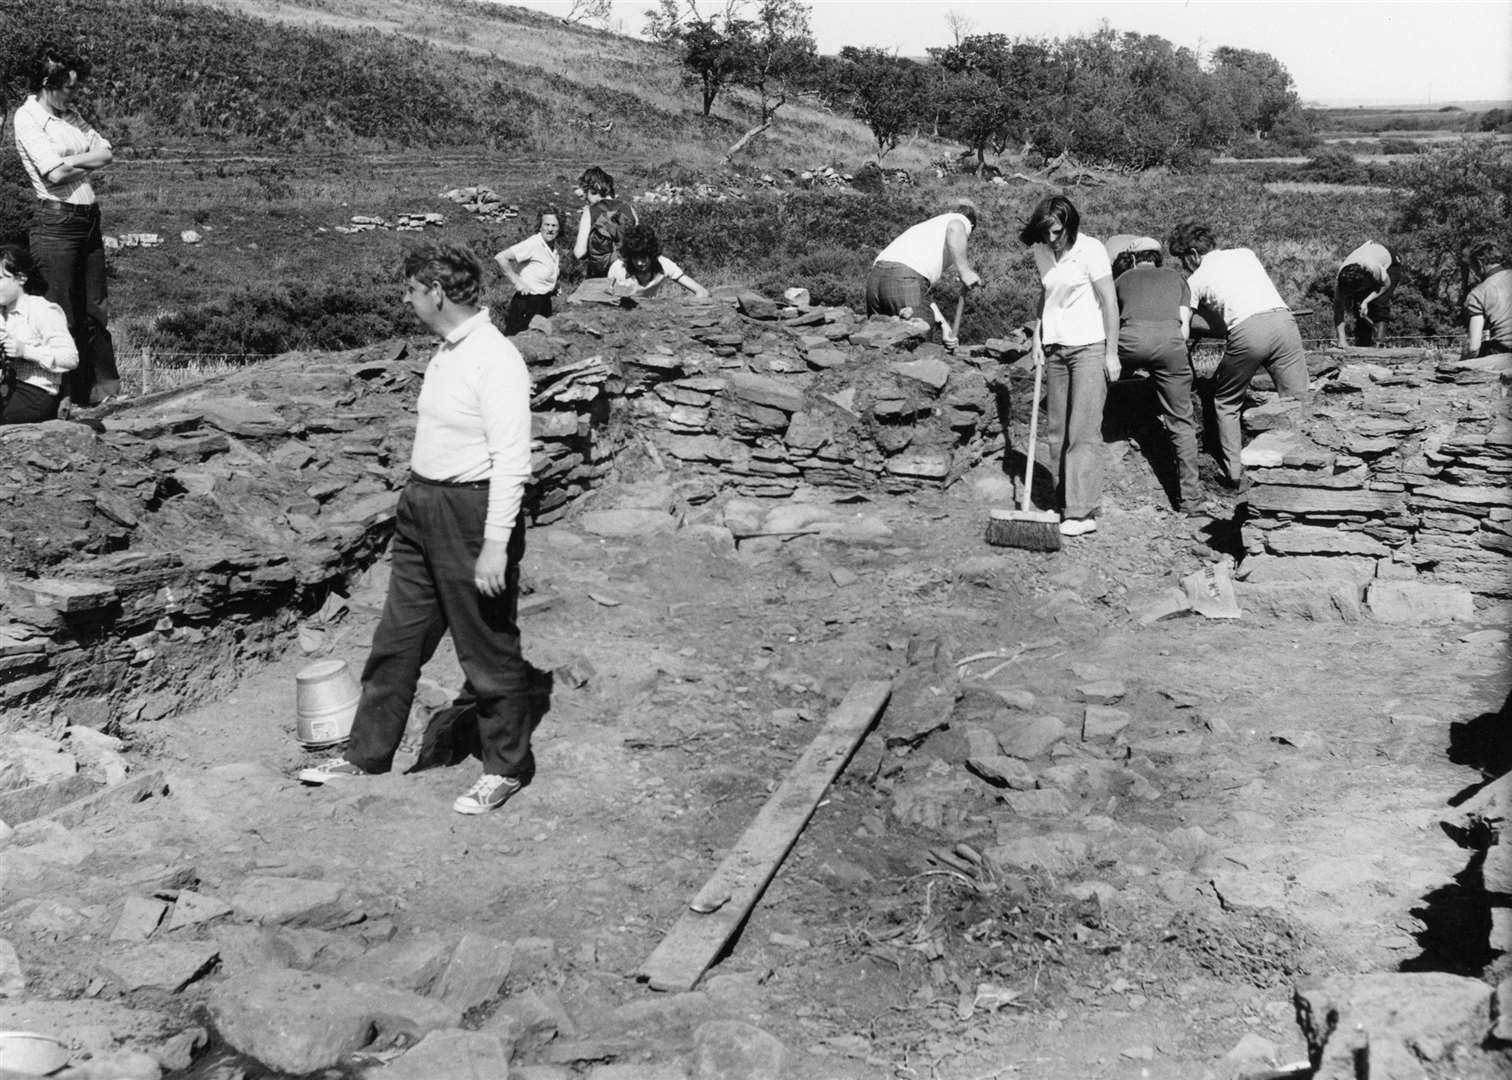 An archaeological dig in progress, possibly in the Watten area, late 1960s or early 1970s. Jack Selby Collection / Thurso Heritage Society